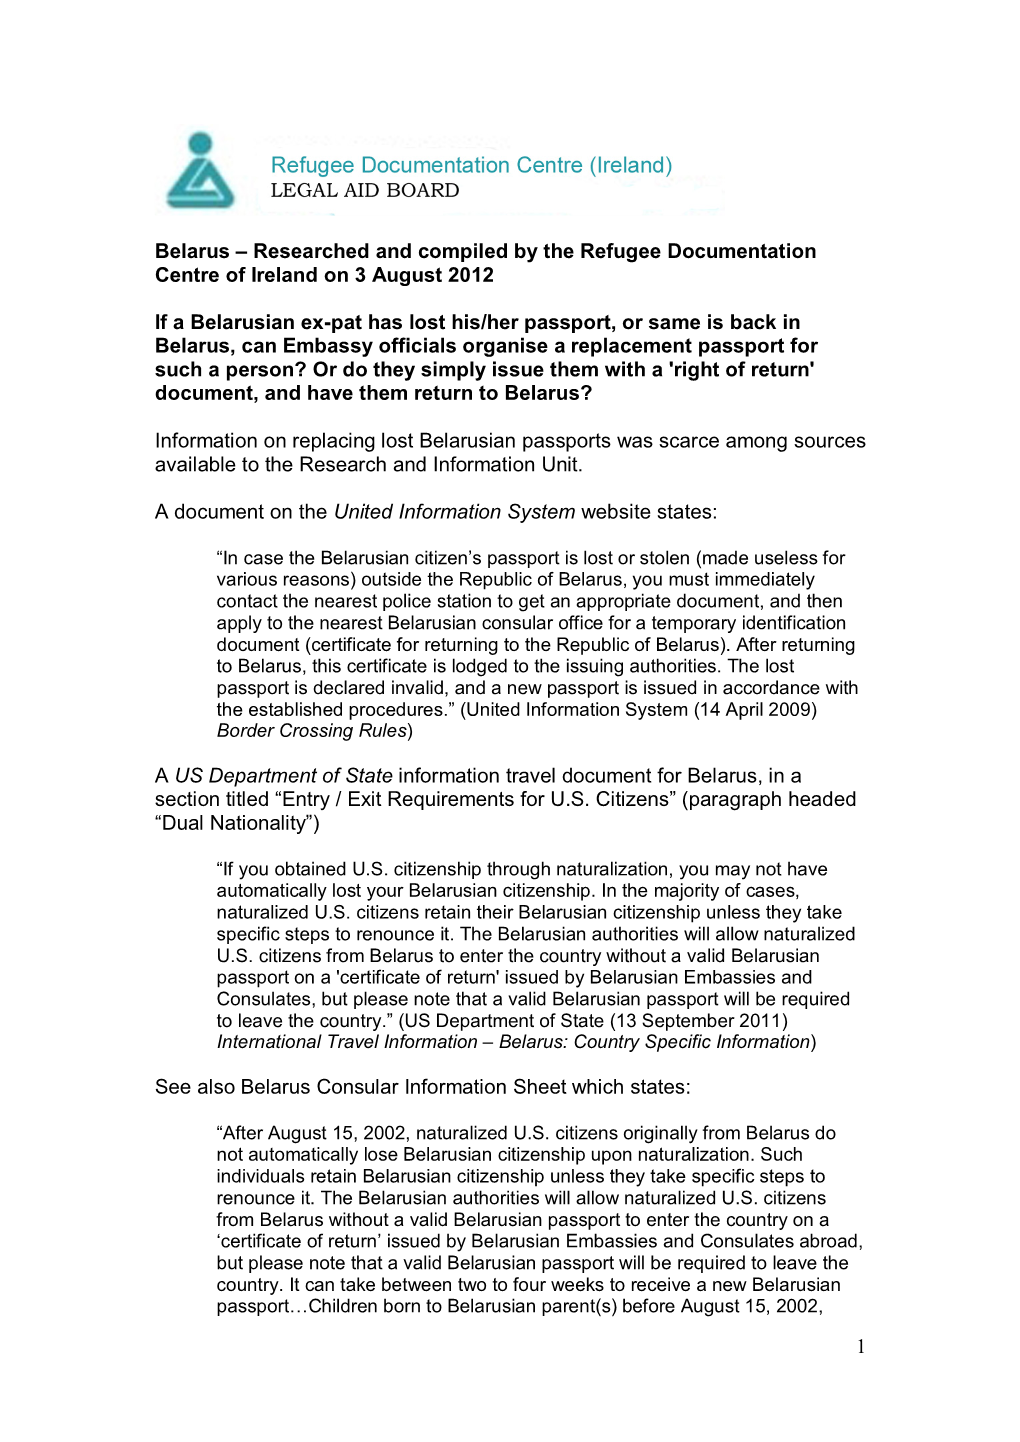 Researched and Compiled by the Refugee Documentation Centre of Ireland on 3 August 2012